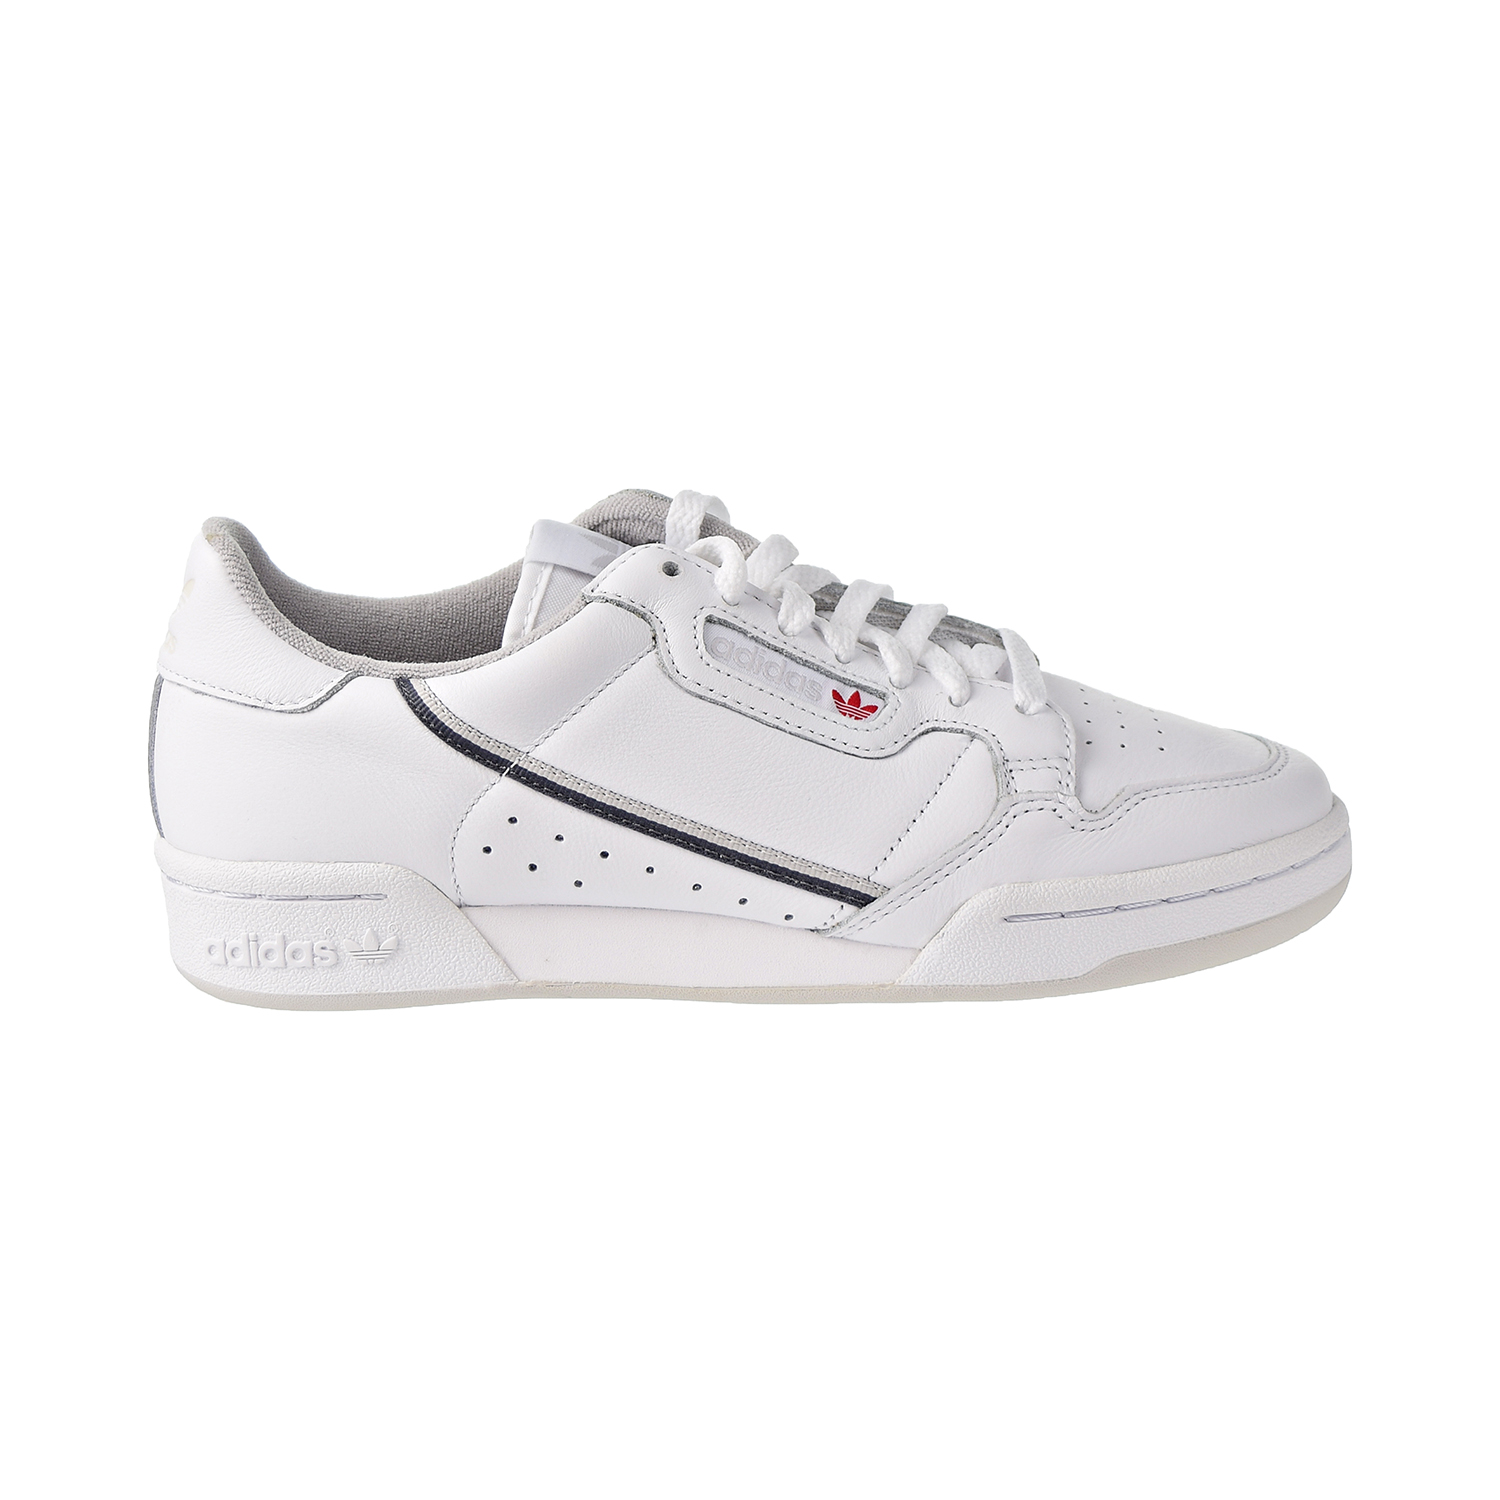 Adidas Continental 80 Mens Cloud White-Grey-Grey One ee5342